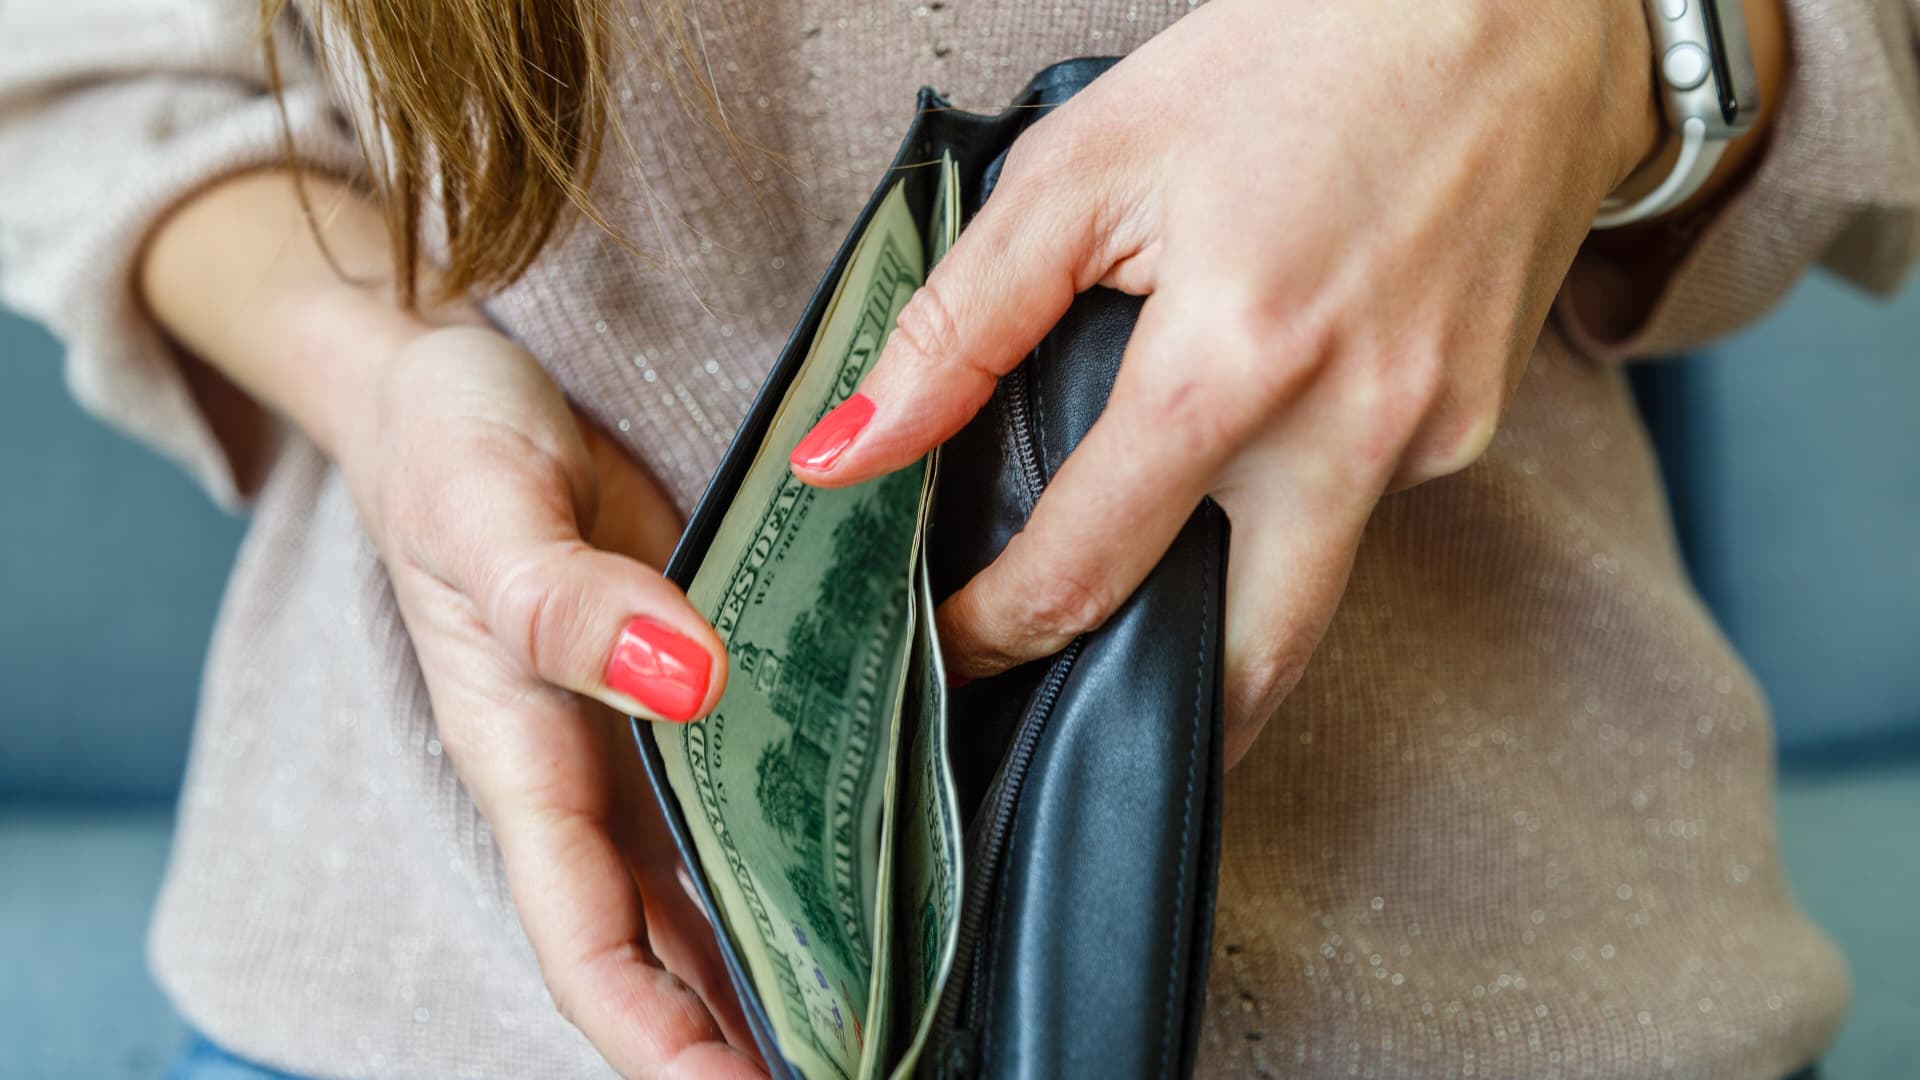 Here's why Americans can't stop living paycheck to paycheck